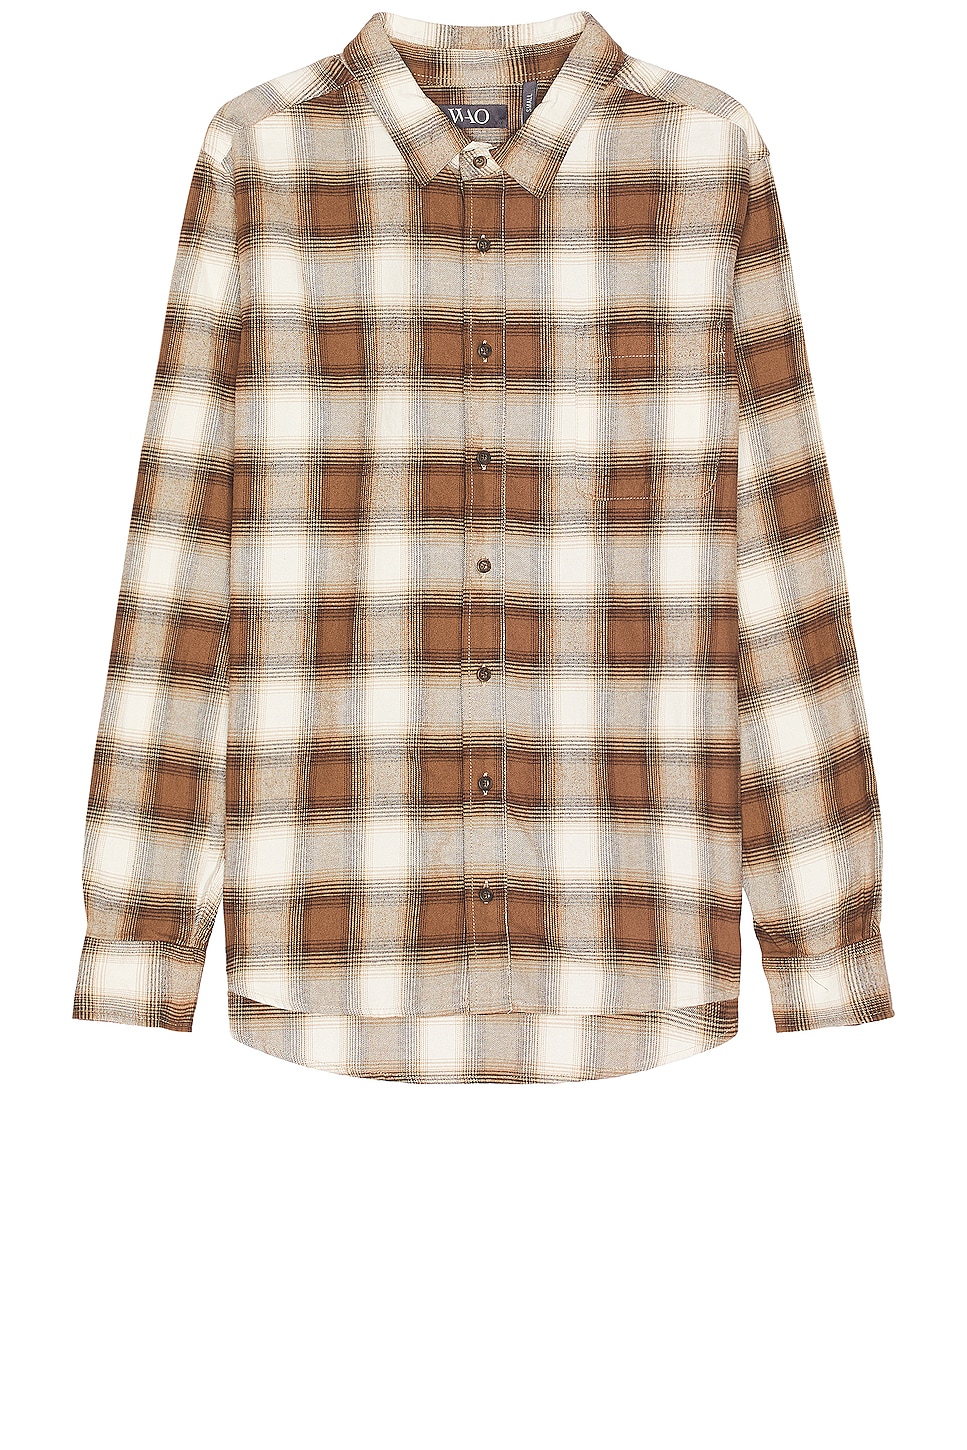 Image 1 of WAO The Flannel Shirt in brown & cream